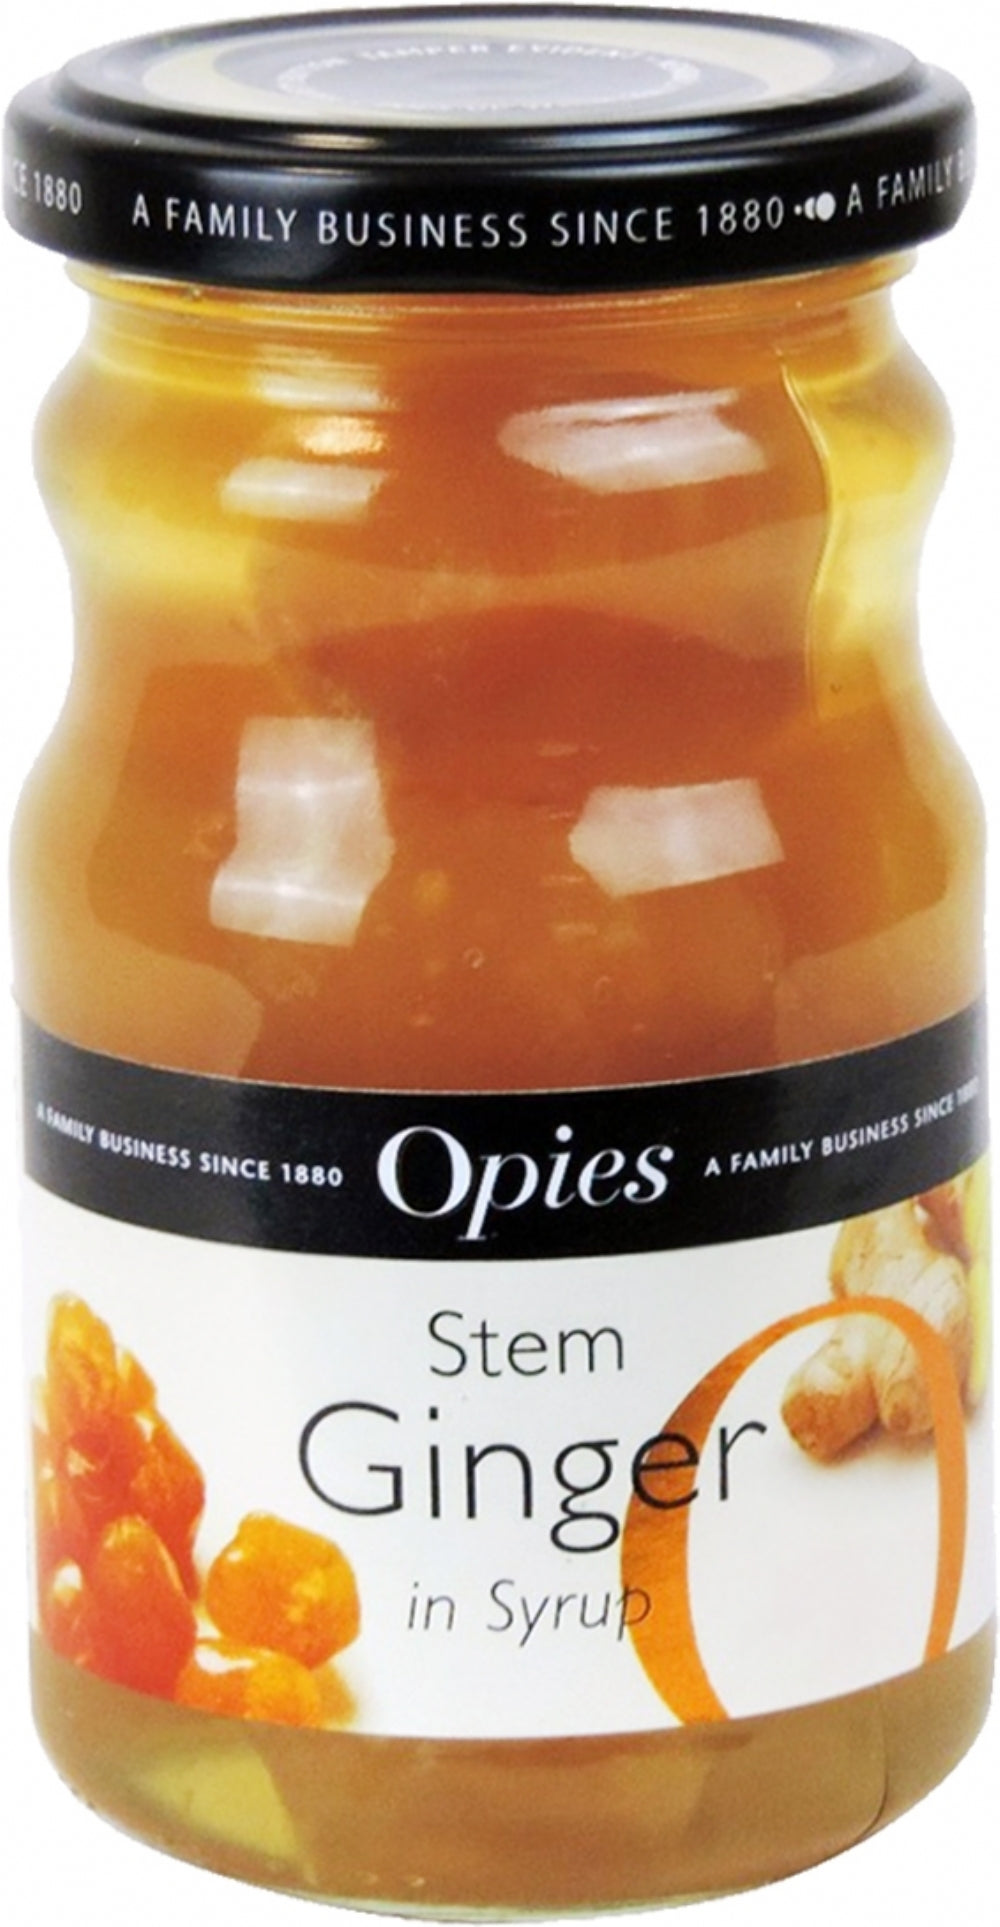 Opies Stem Ginger in Syrup 280g x 6